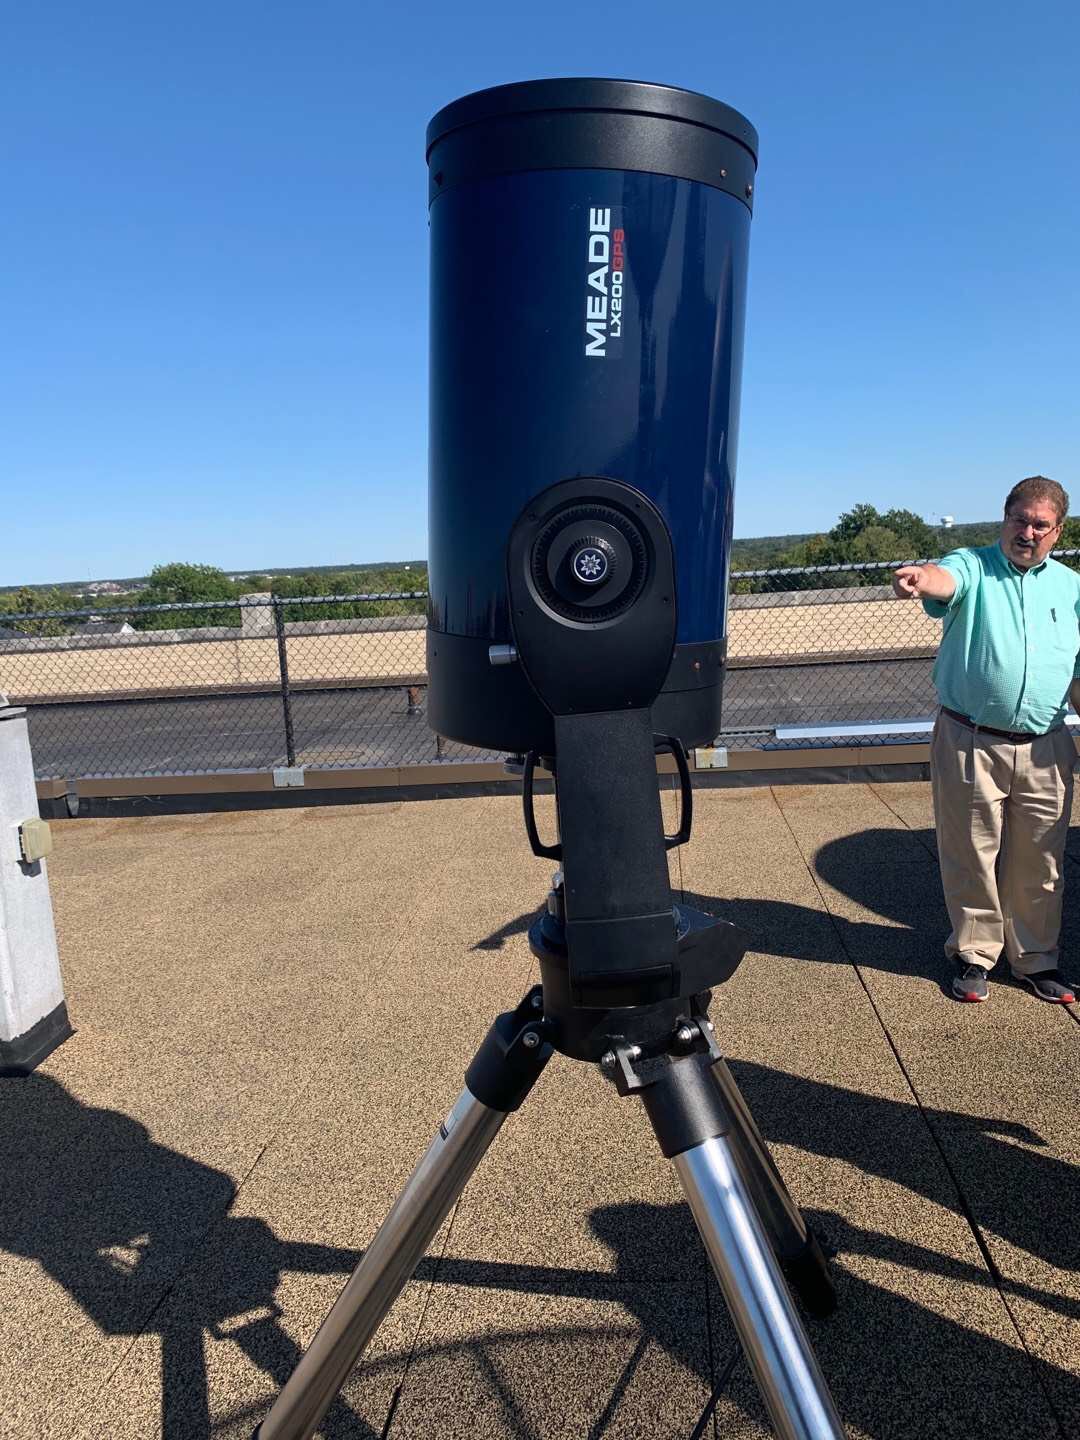 Meade 14" on its tripod (10/07/2019; Val in the background)